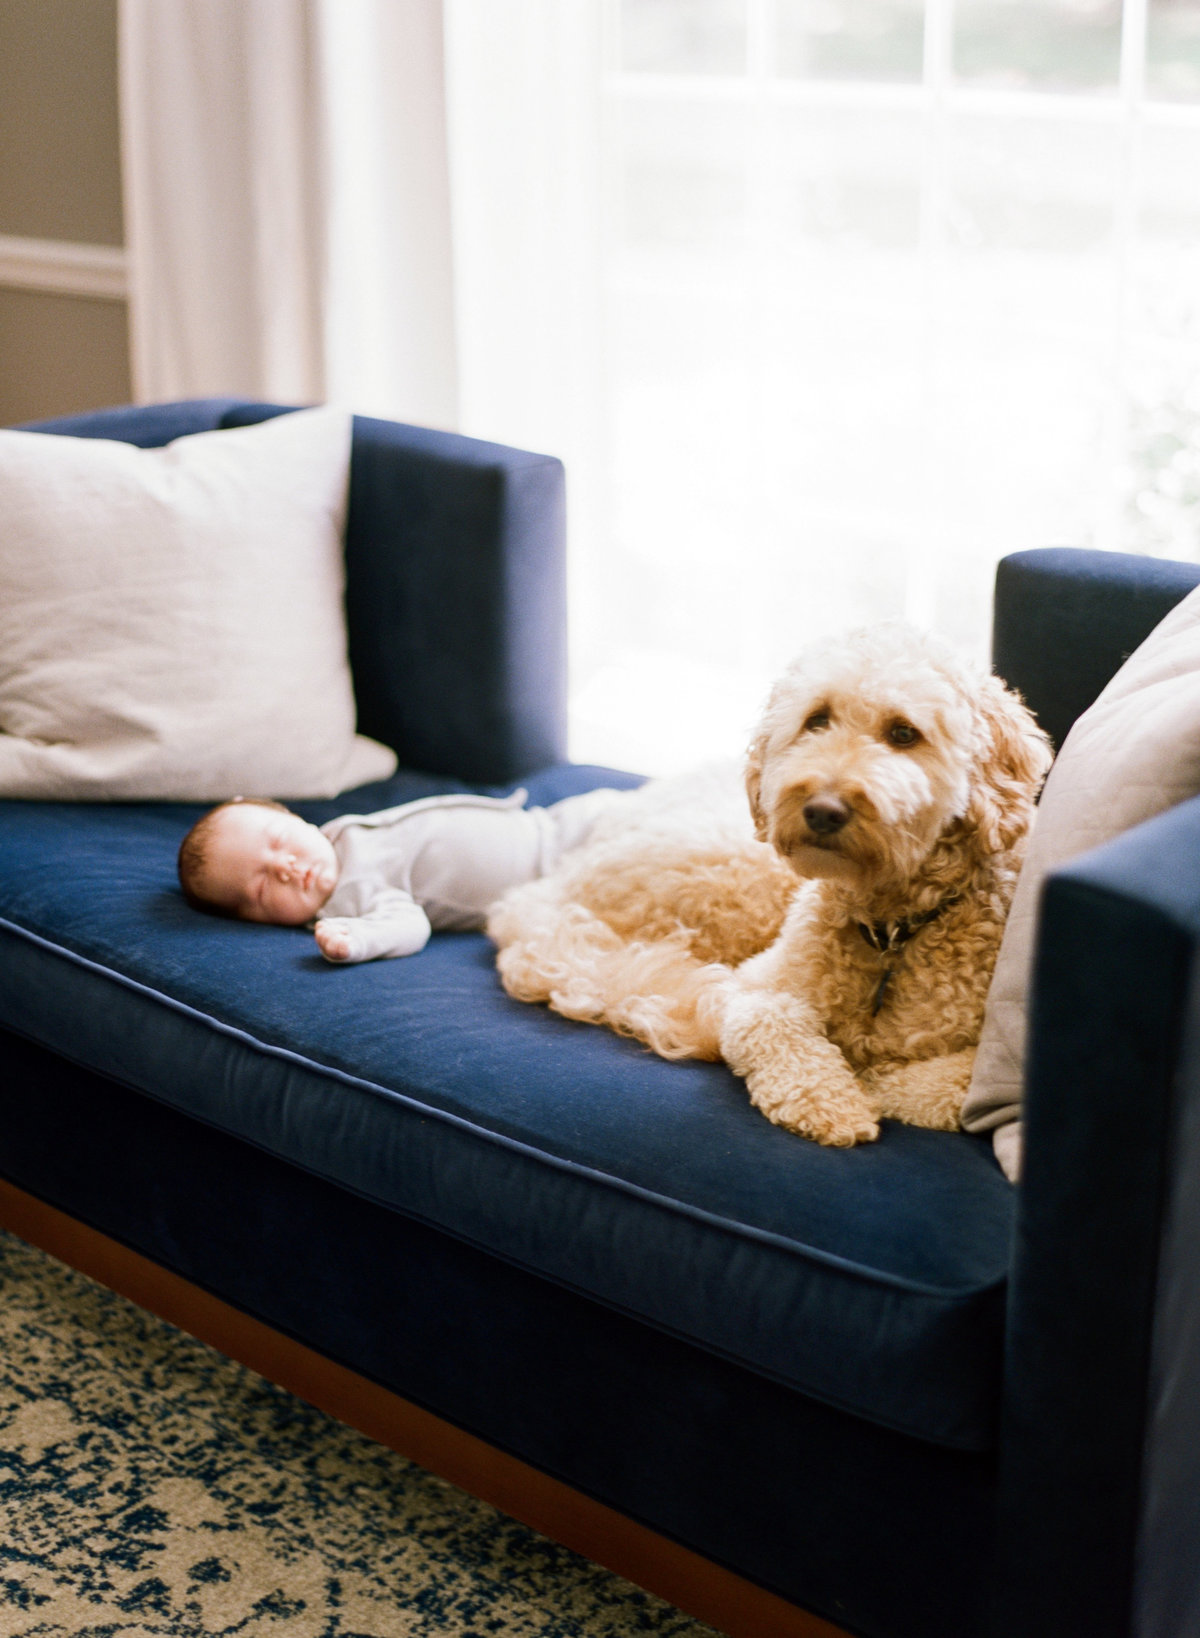 Goldendoodle dog snuggles newborn baby on a blue couch during a Raleigh NC newborn photography session. Photographed by Raleigh newborn photographers A.J. Dunlap Photography.